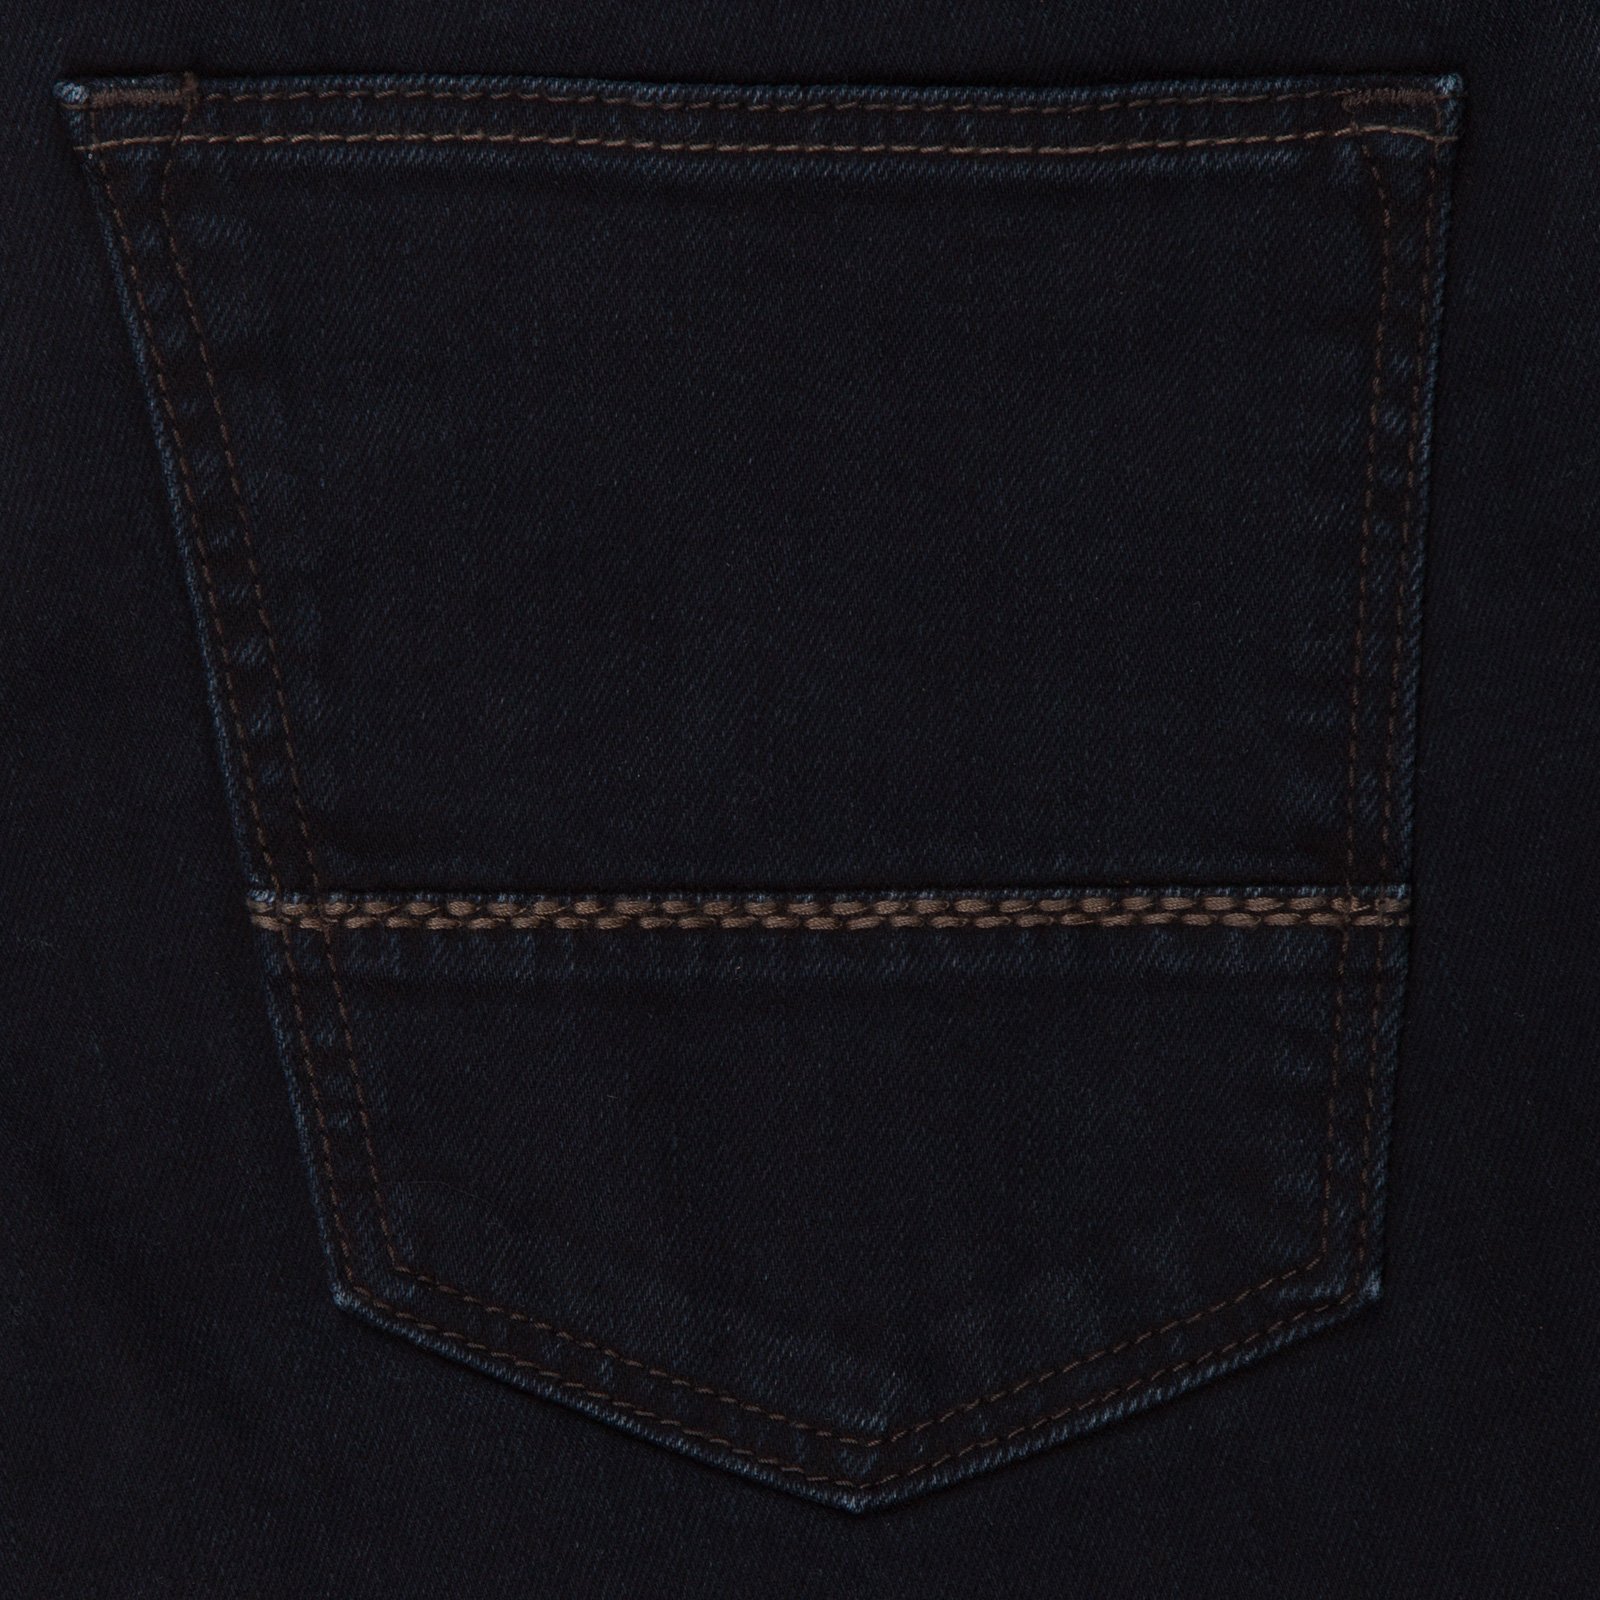 Durban Fair Trade Stretch Denim Jeans - Jeans : FA2 Online Outlet Store ...